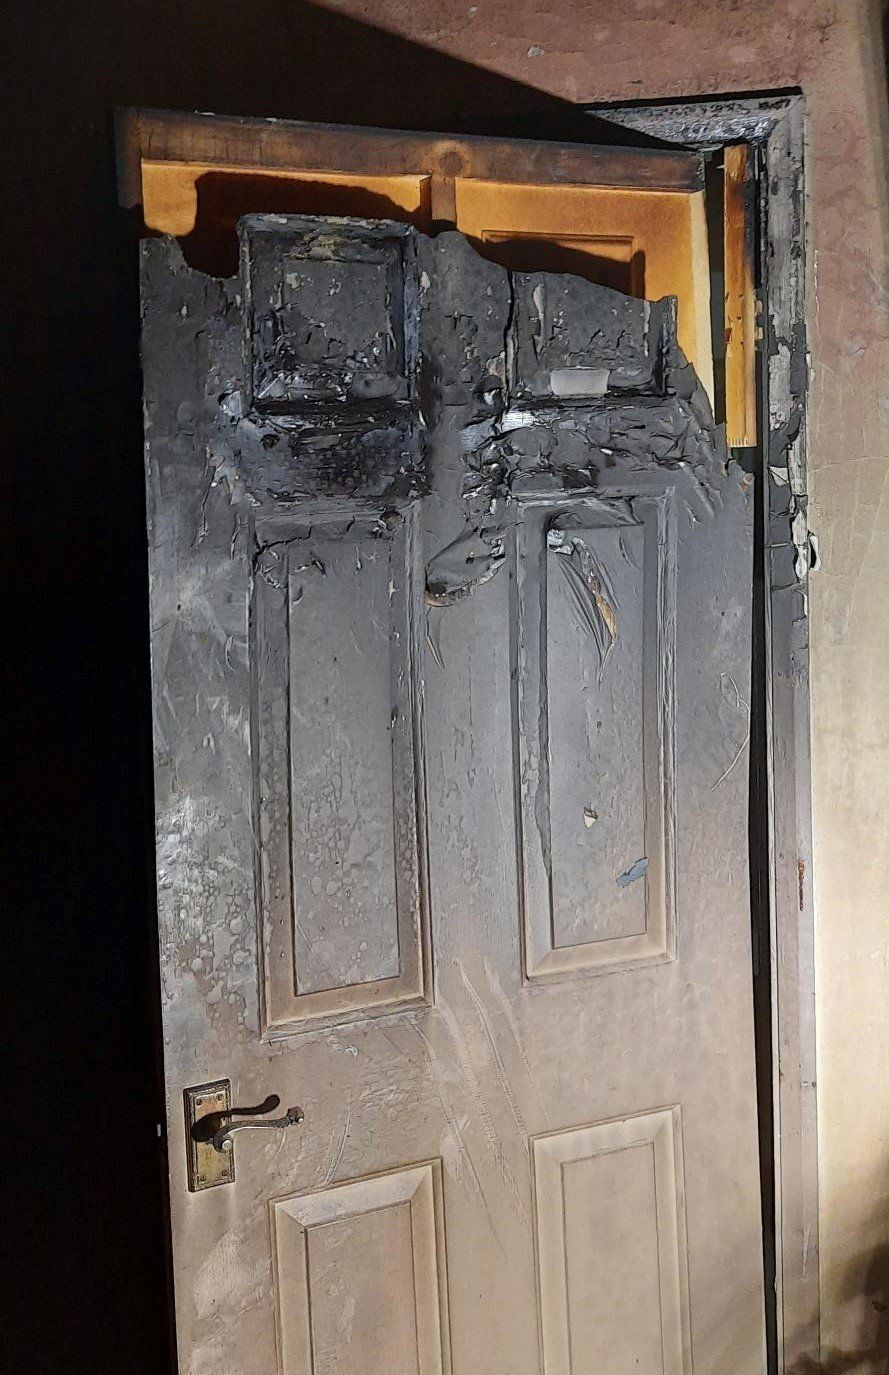 A door is partially melted by fire